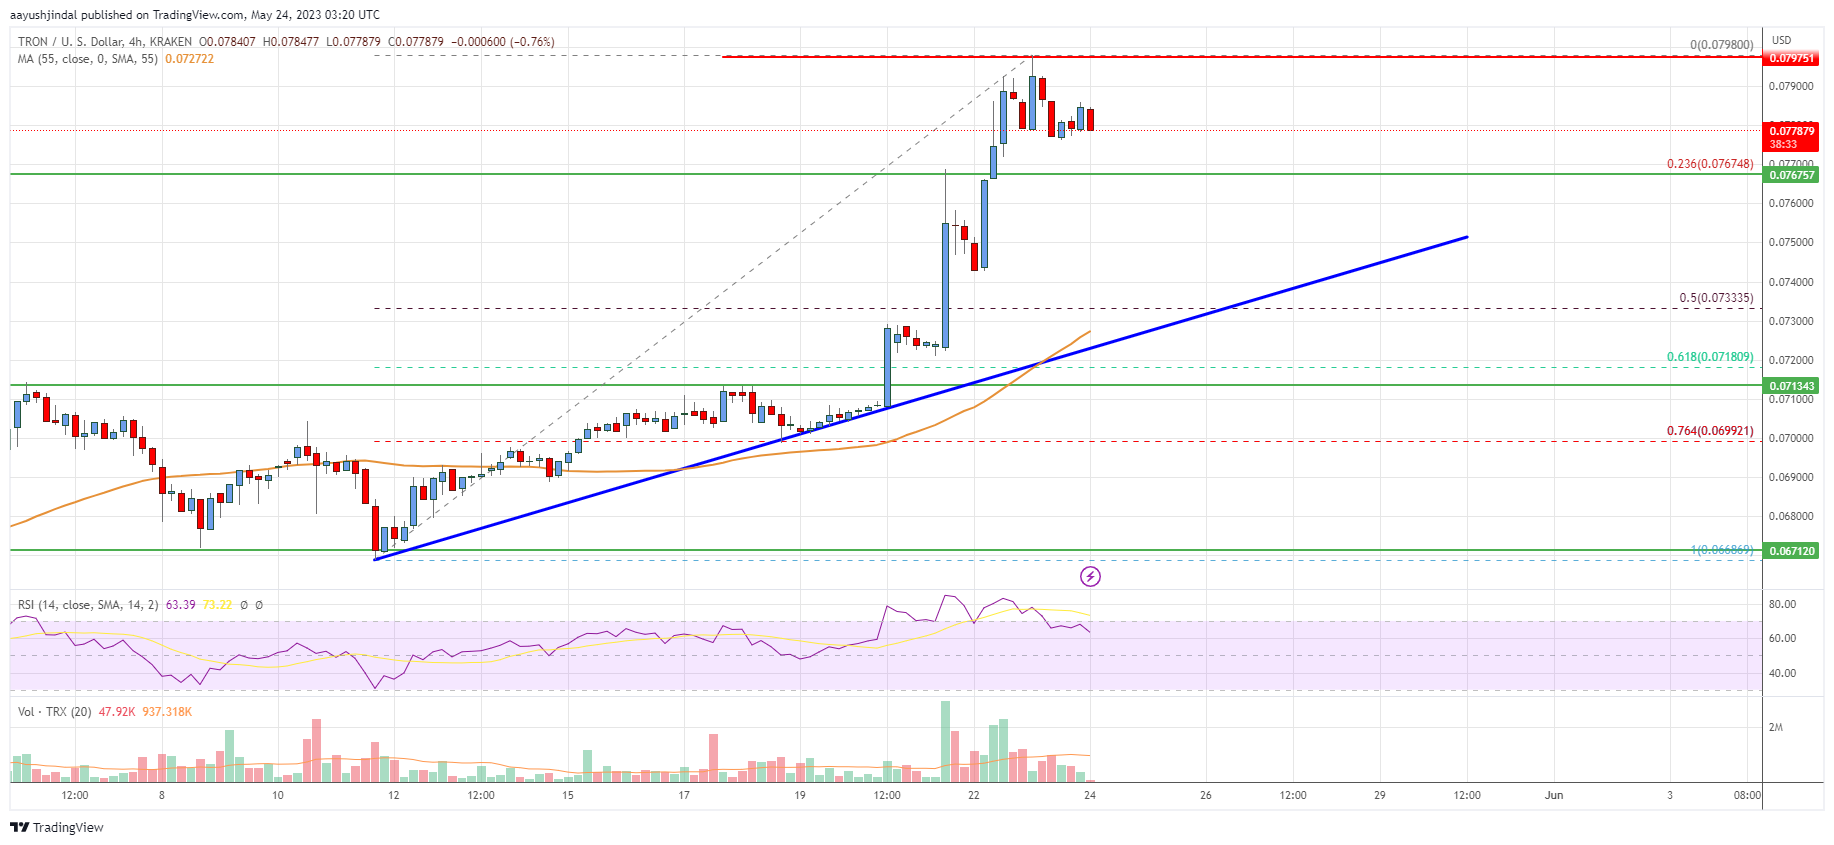 Tron (TRX) Price Analysis: Rally Could Extend above $0.08